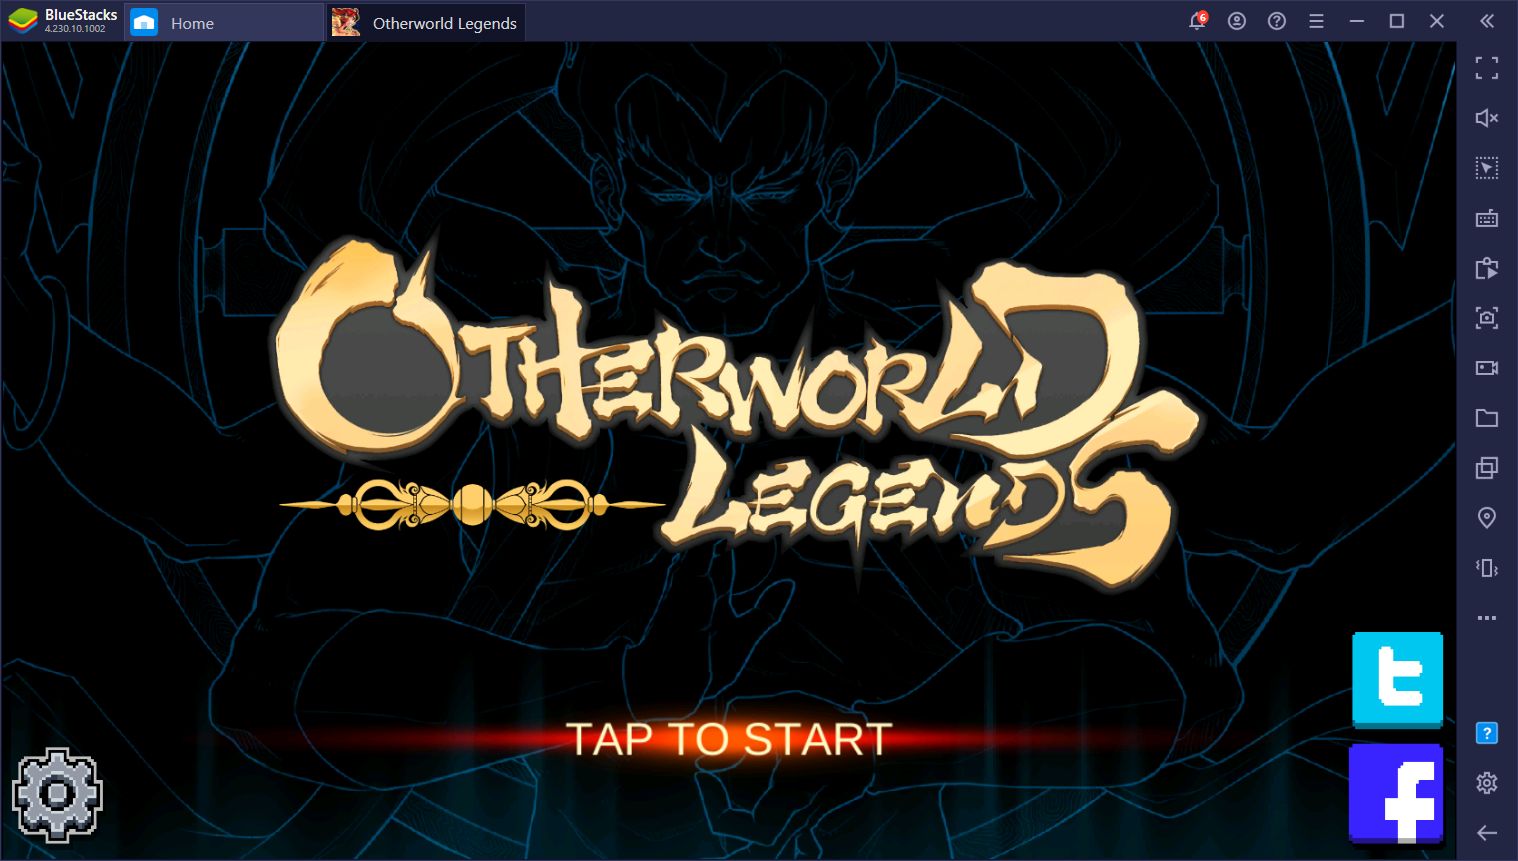 Otherworld Legends - How to Play This Adrenaline-Inducing Action Roguelike Game on PC